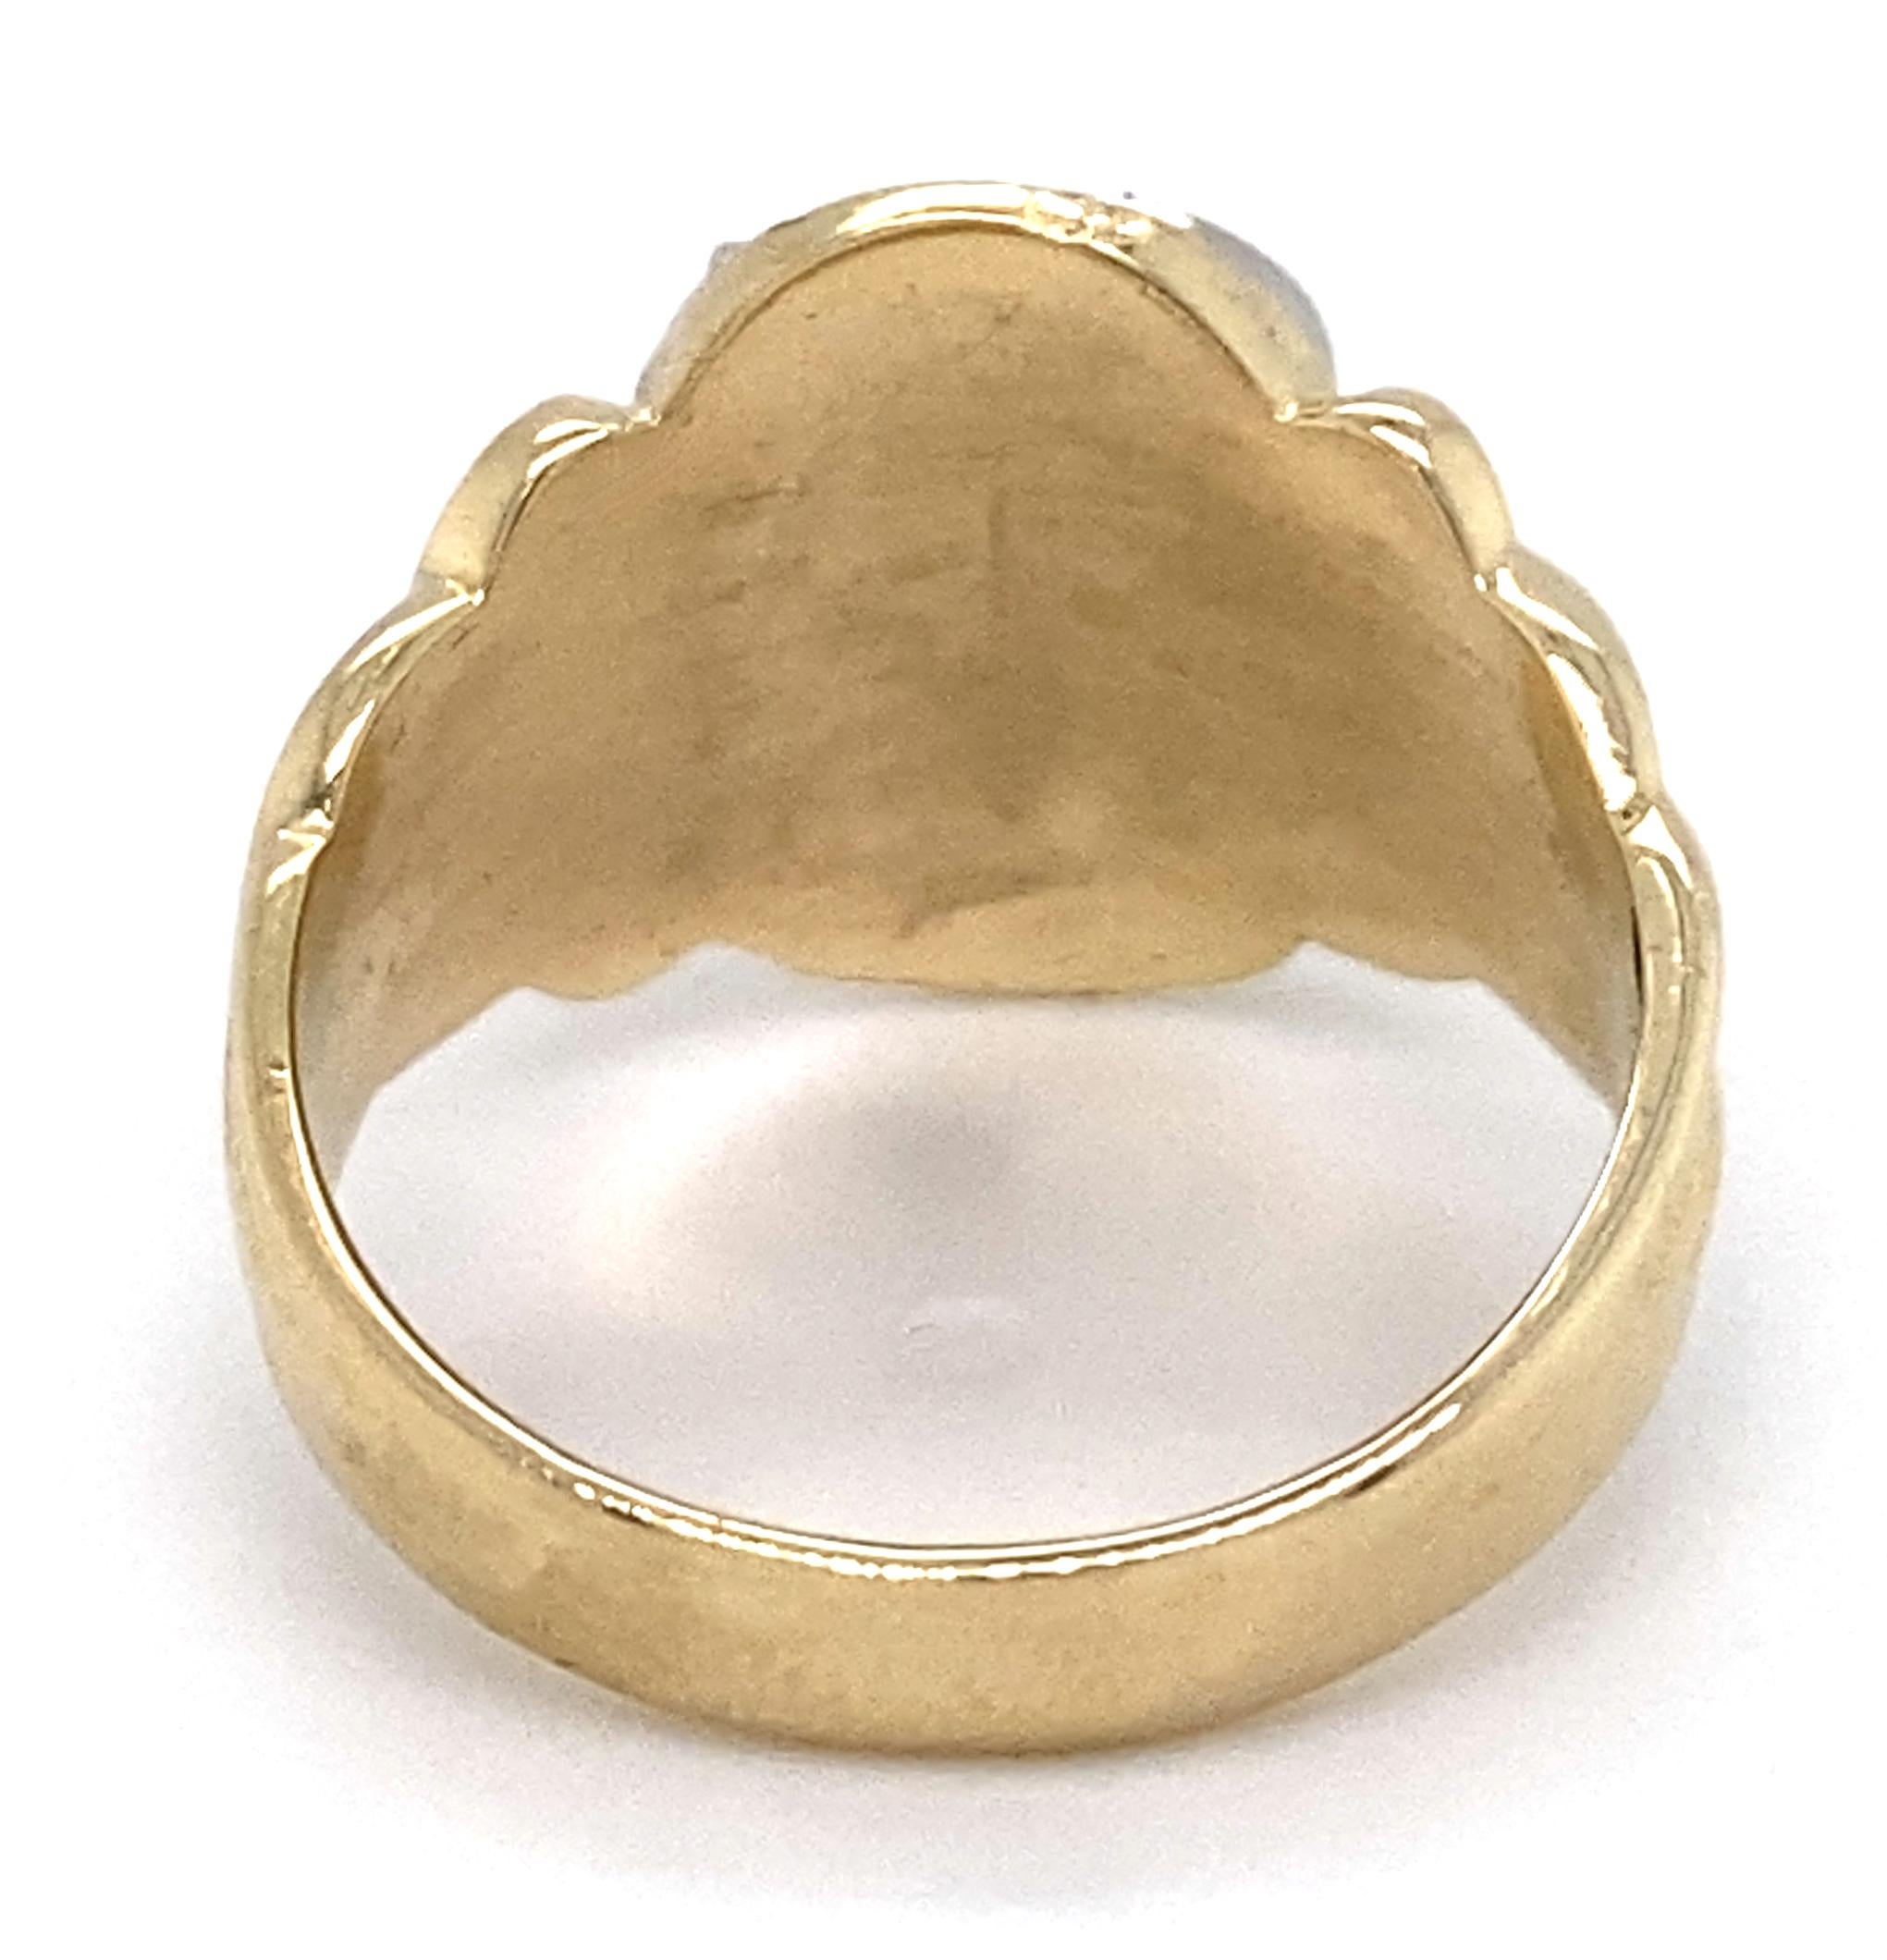 Monogram Ring with Olde English Letter 